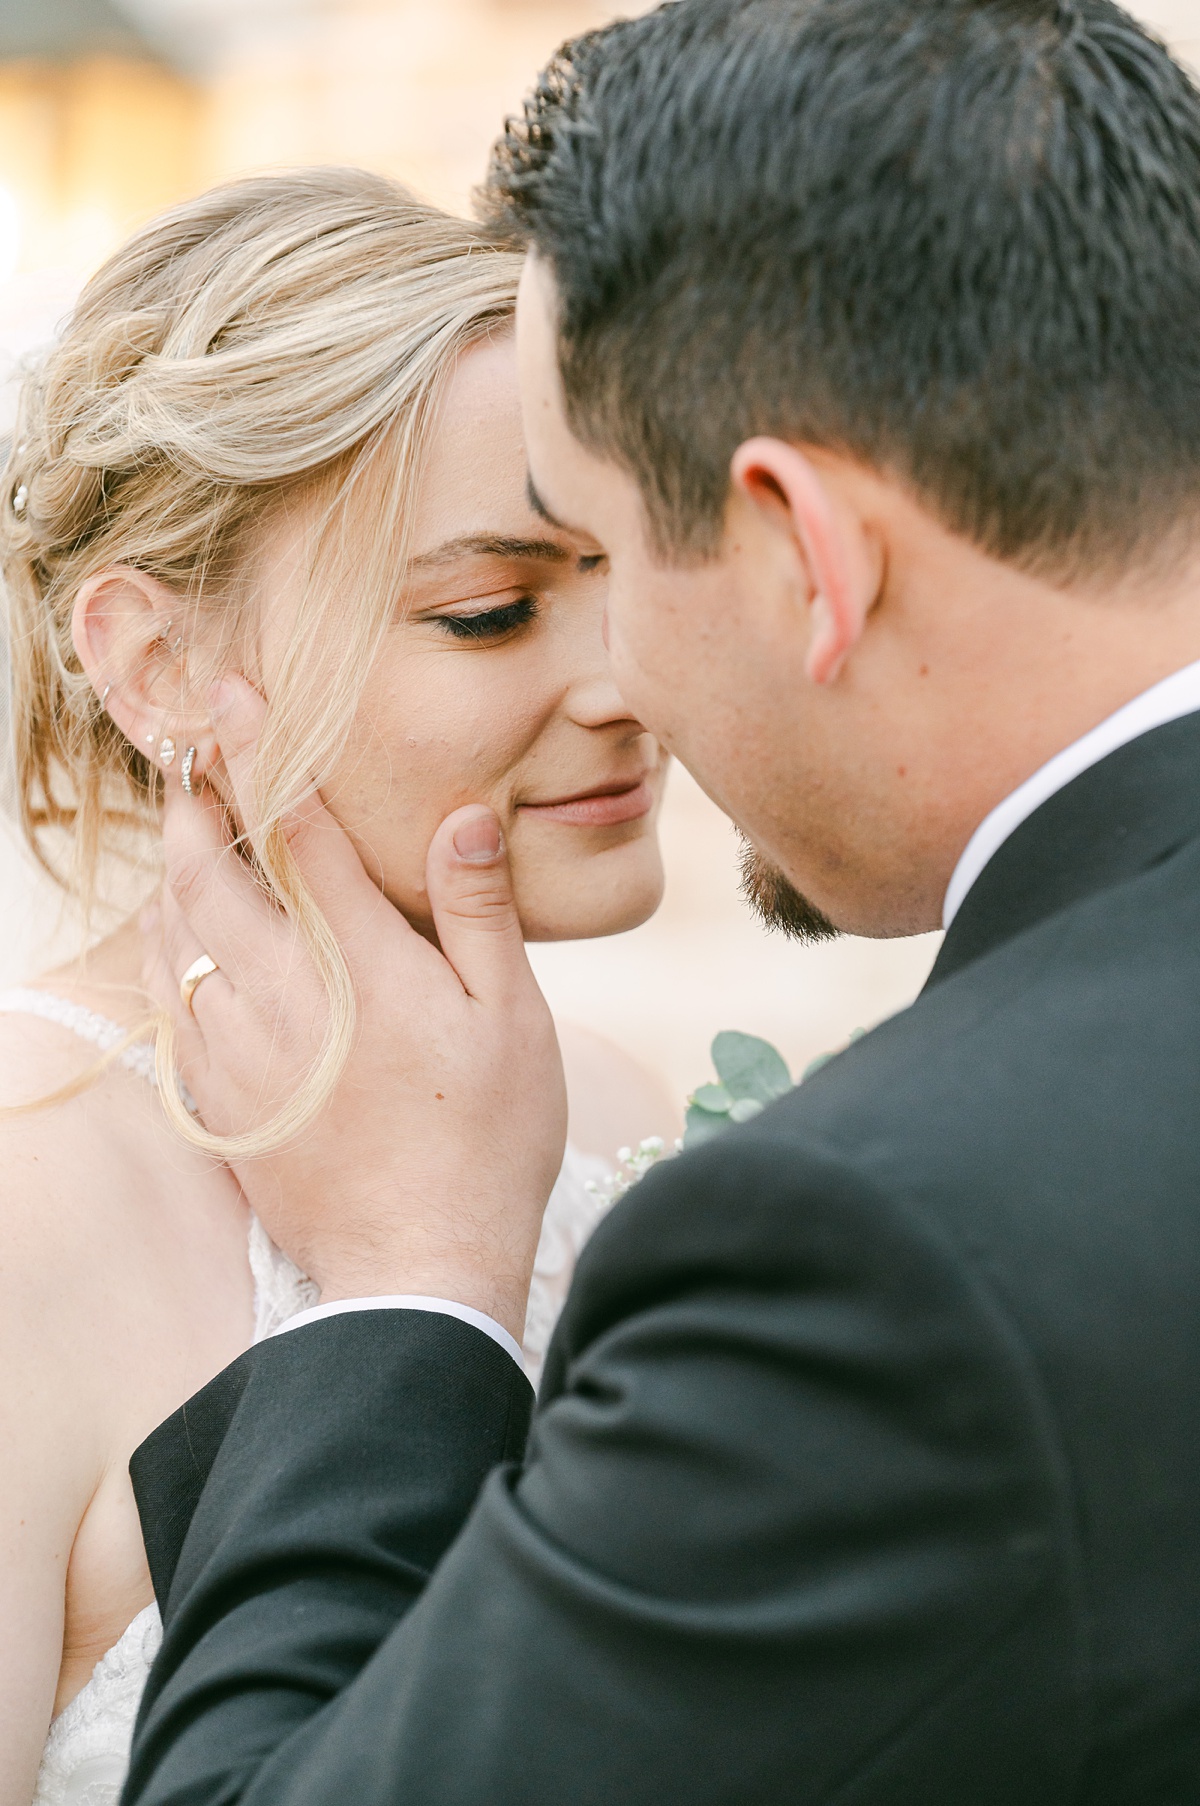 intimate moment between bride and groom